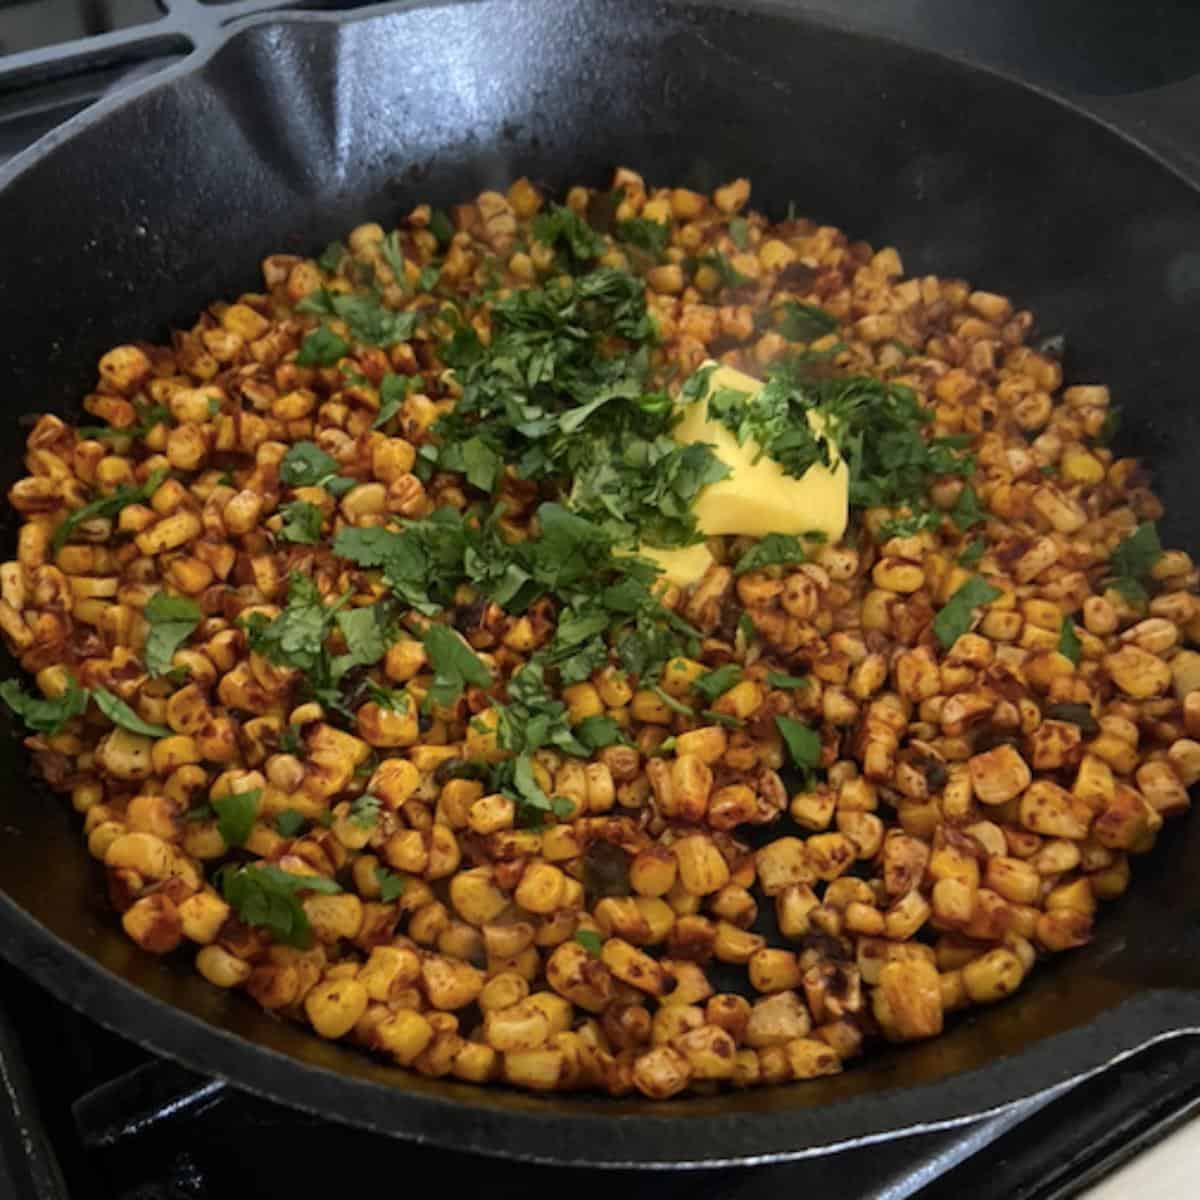 butter and cilantro added into skillet filled with charred corn